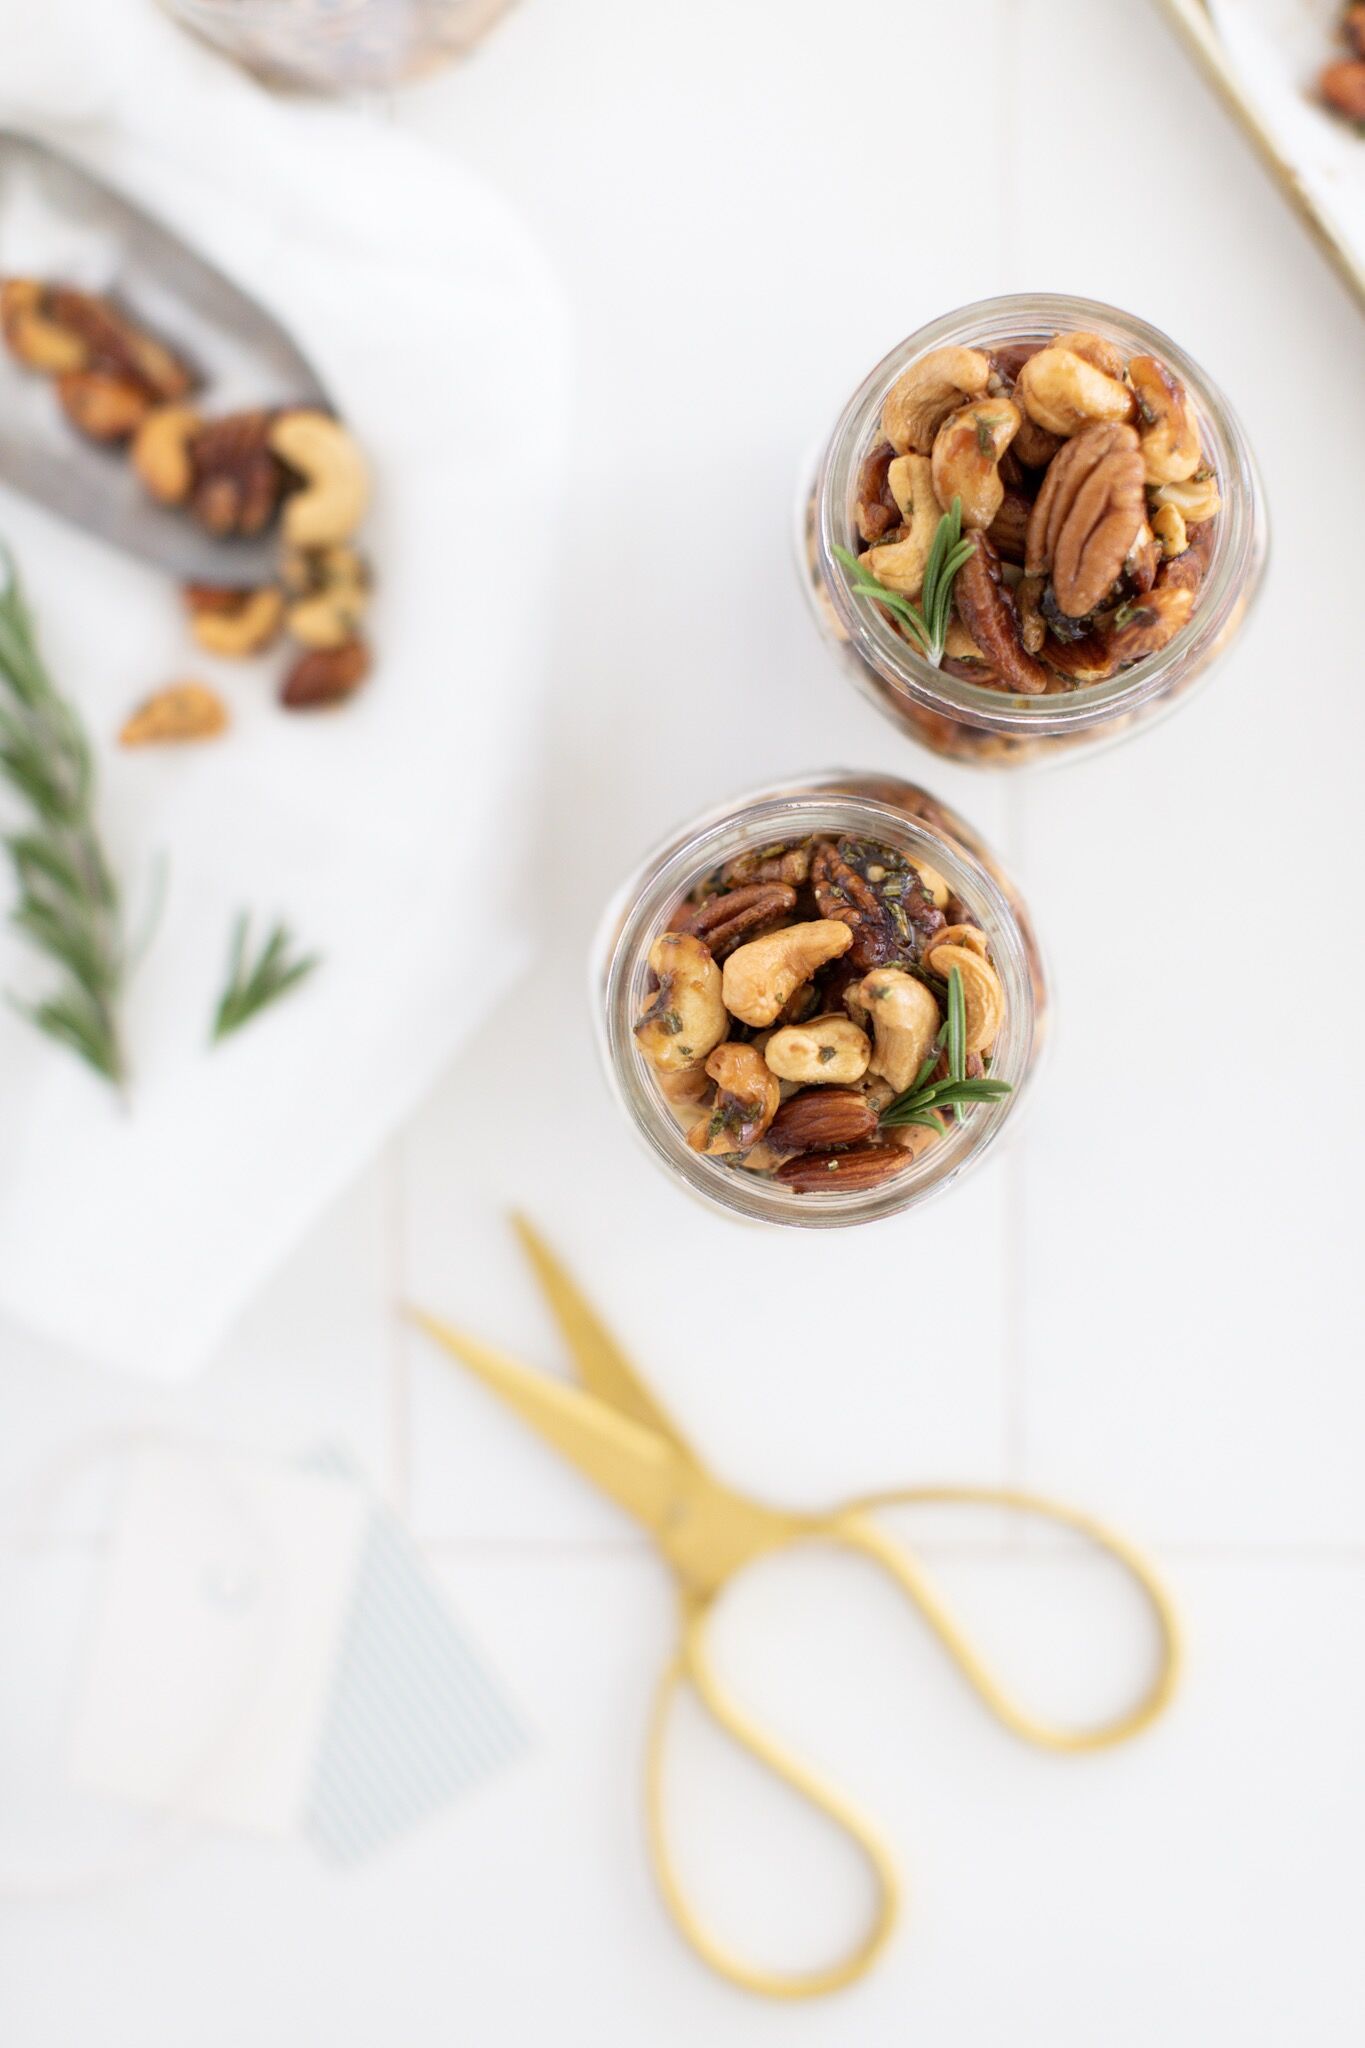 Rosemary Roasted Nuts - a perfect hostess gift or addition to your appetizer spread.